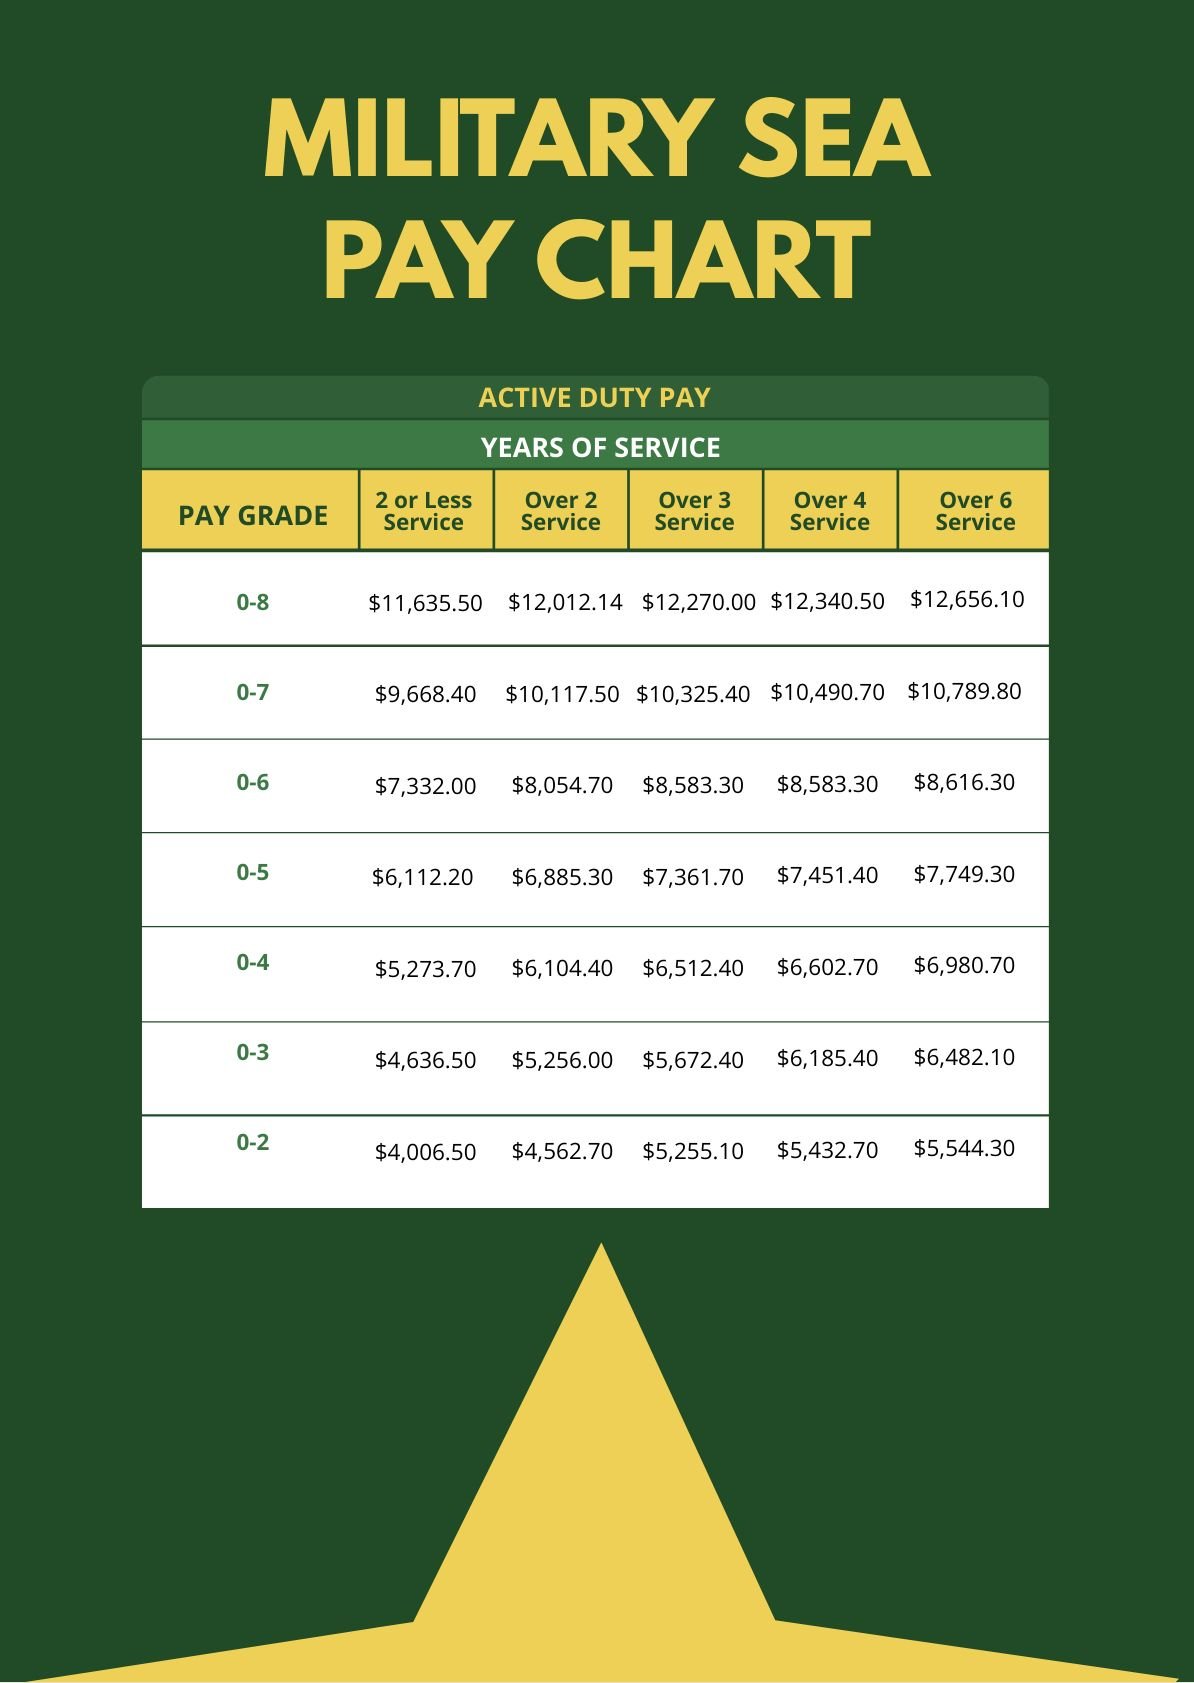 Enlisted Military Pay Chart in PDF